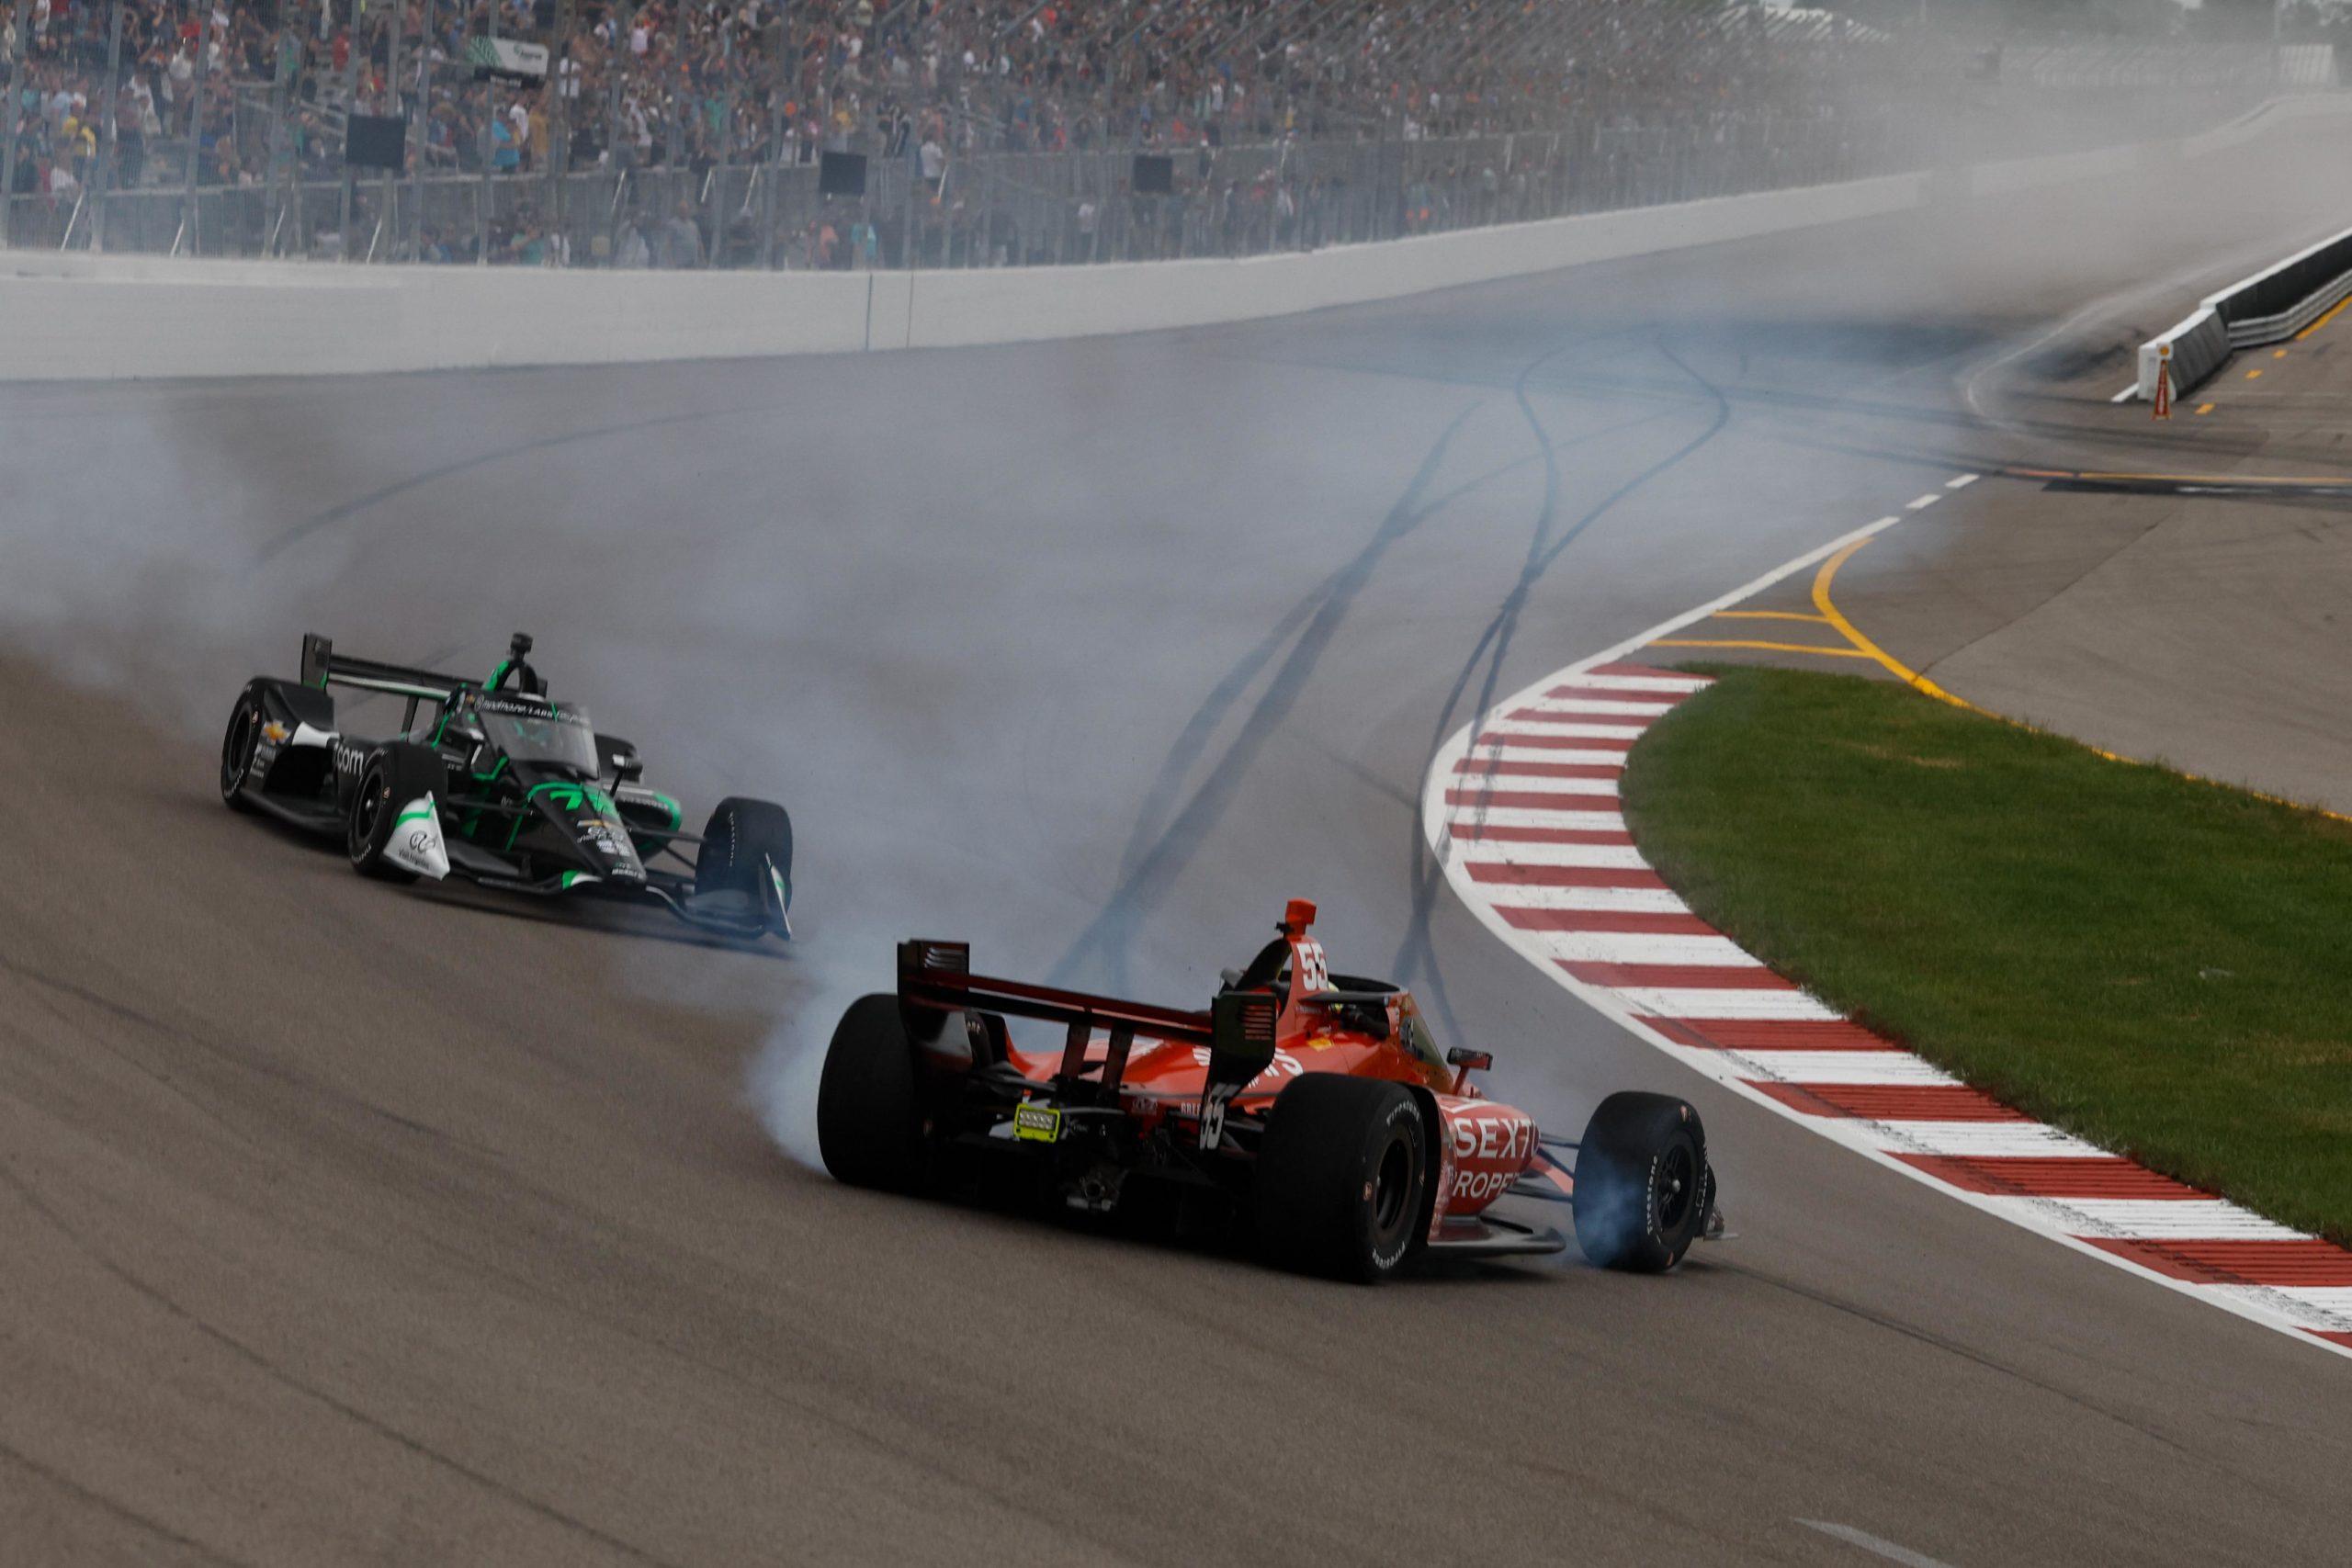 the near-$1m race for ‘last’ still riding on indycar’s finale